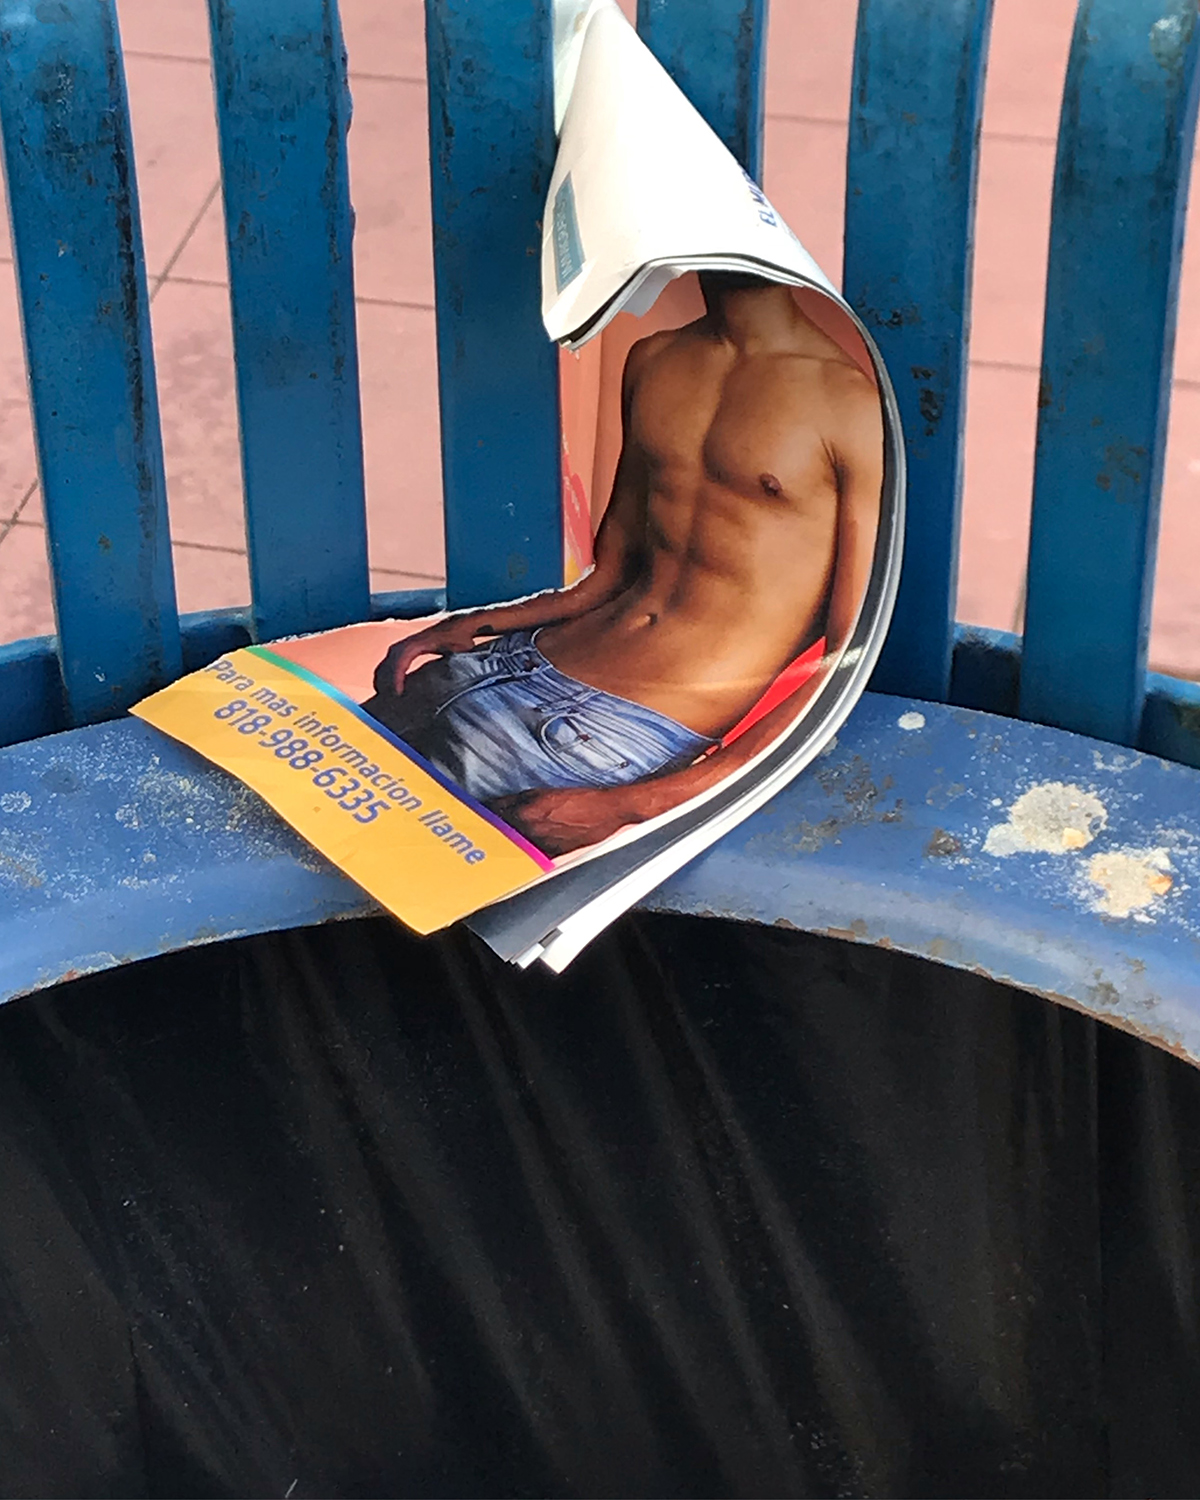 Surreal urban photograph of a man's torso torn out of a magazine on a bench